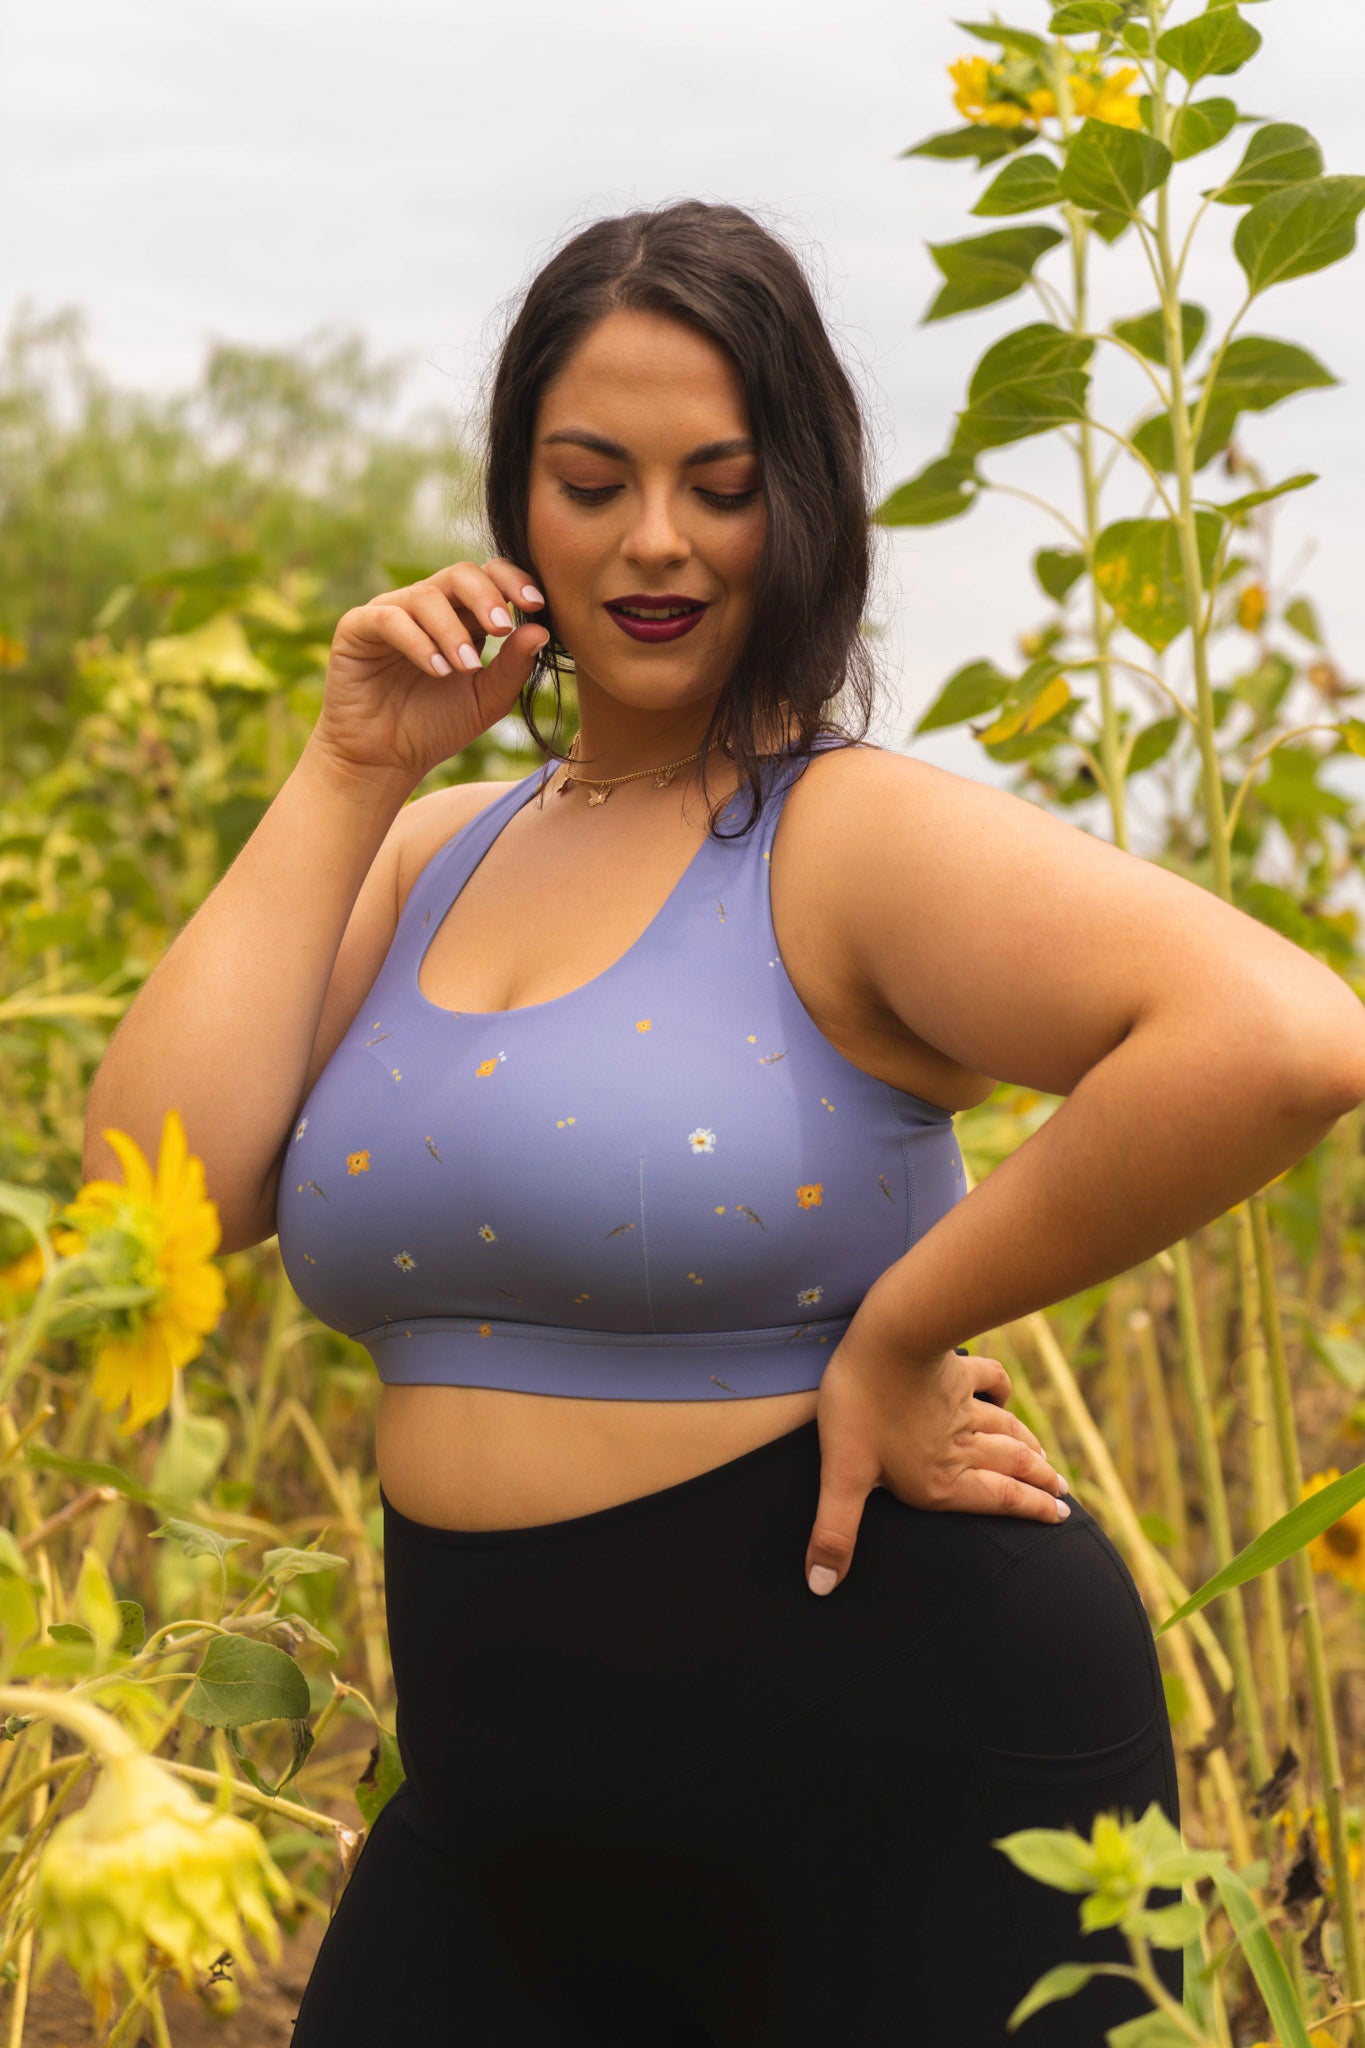 High quality plus size fashion activewear sports bra! POPFLEX model wears the Sunrise Bra from the POPFLEX cottagecore collection